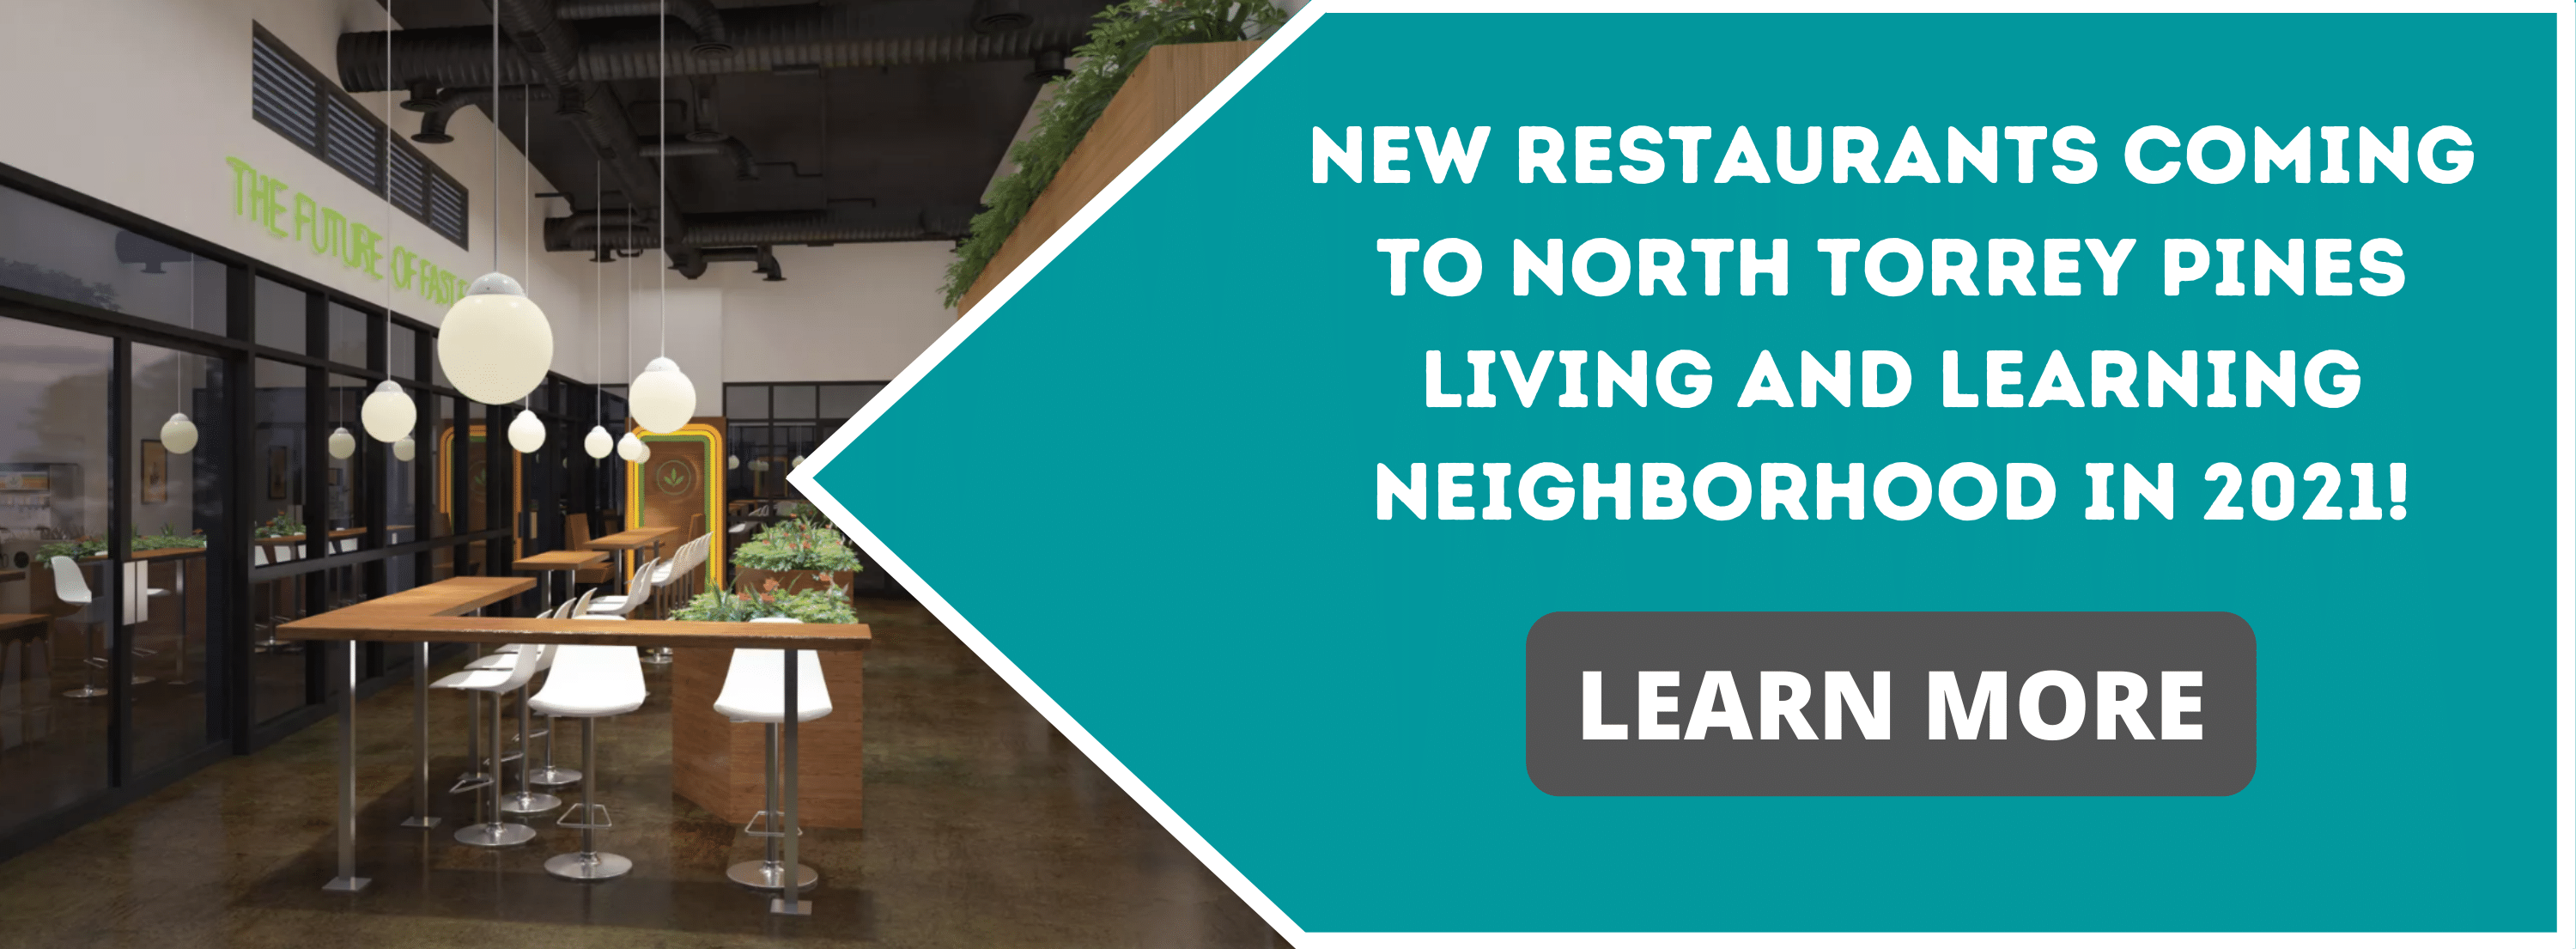 North Torrey Pines Living and Learning Neighborhood Food Eatery Updates